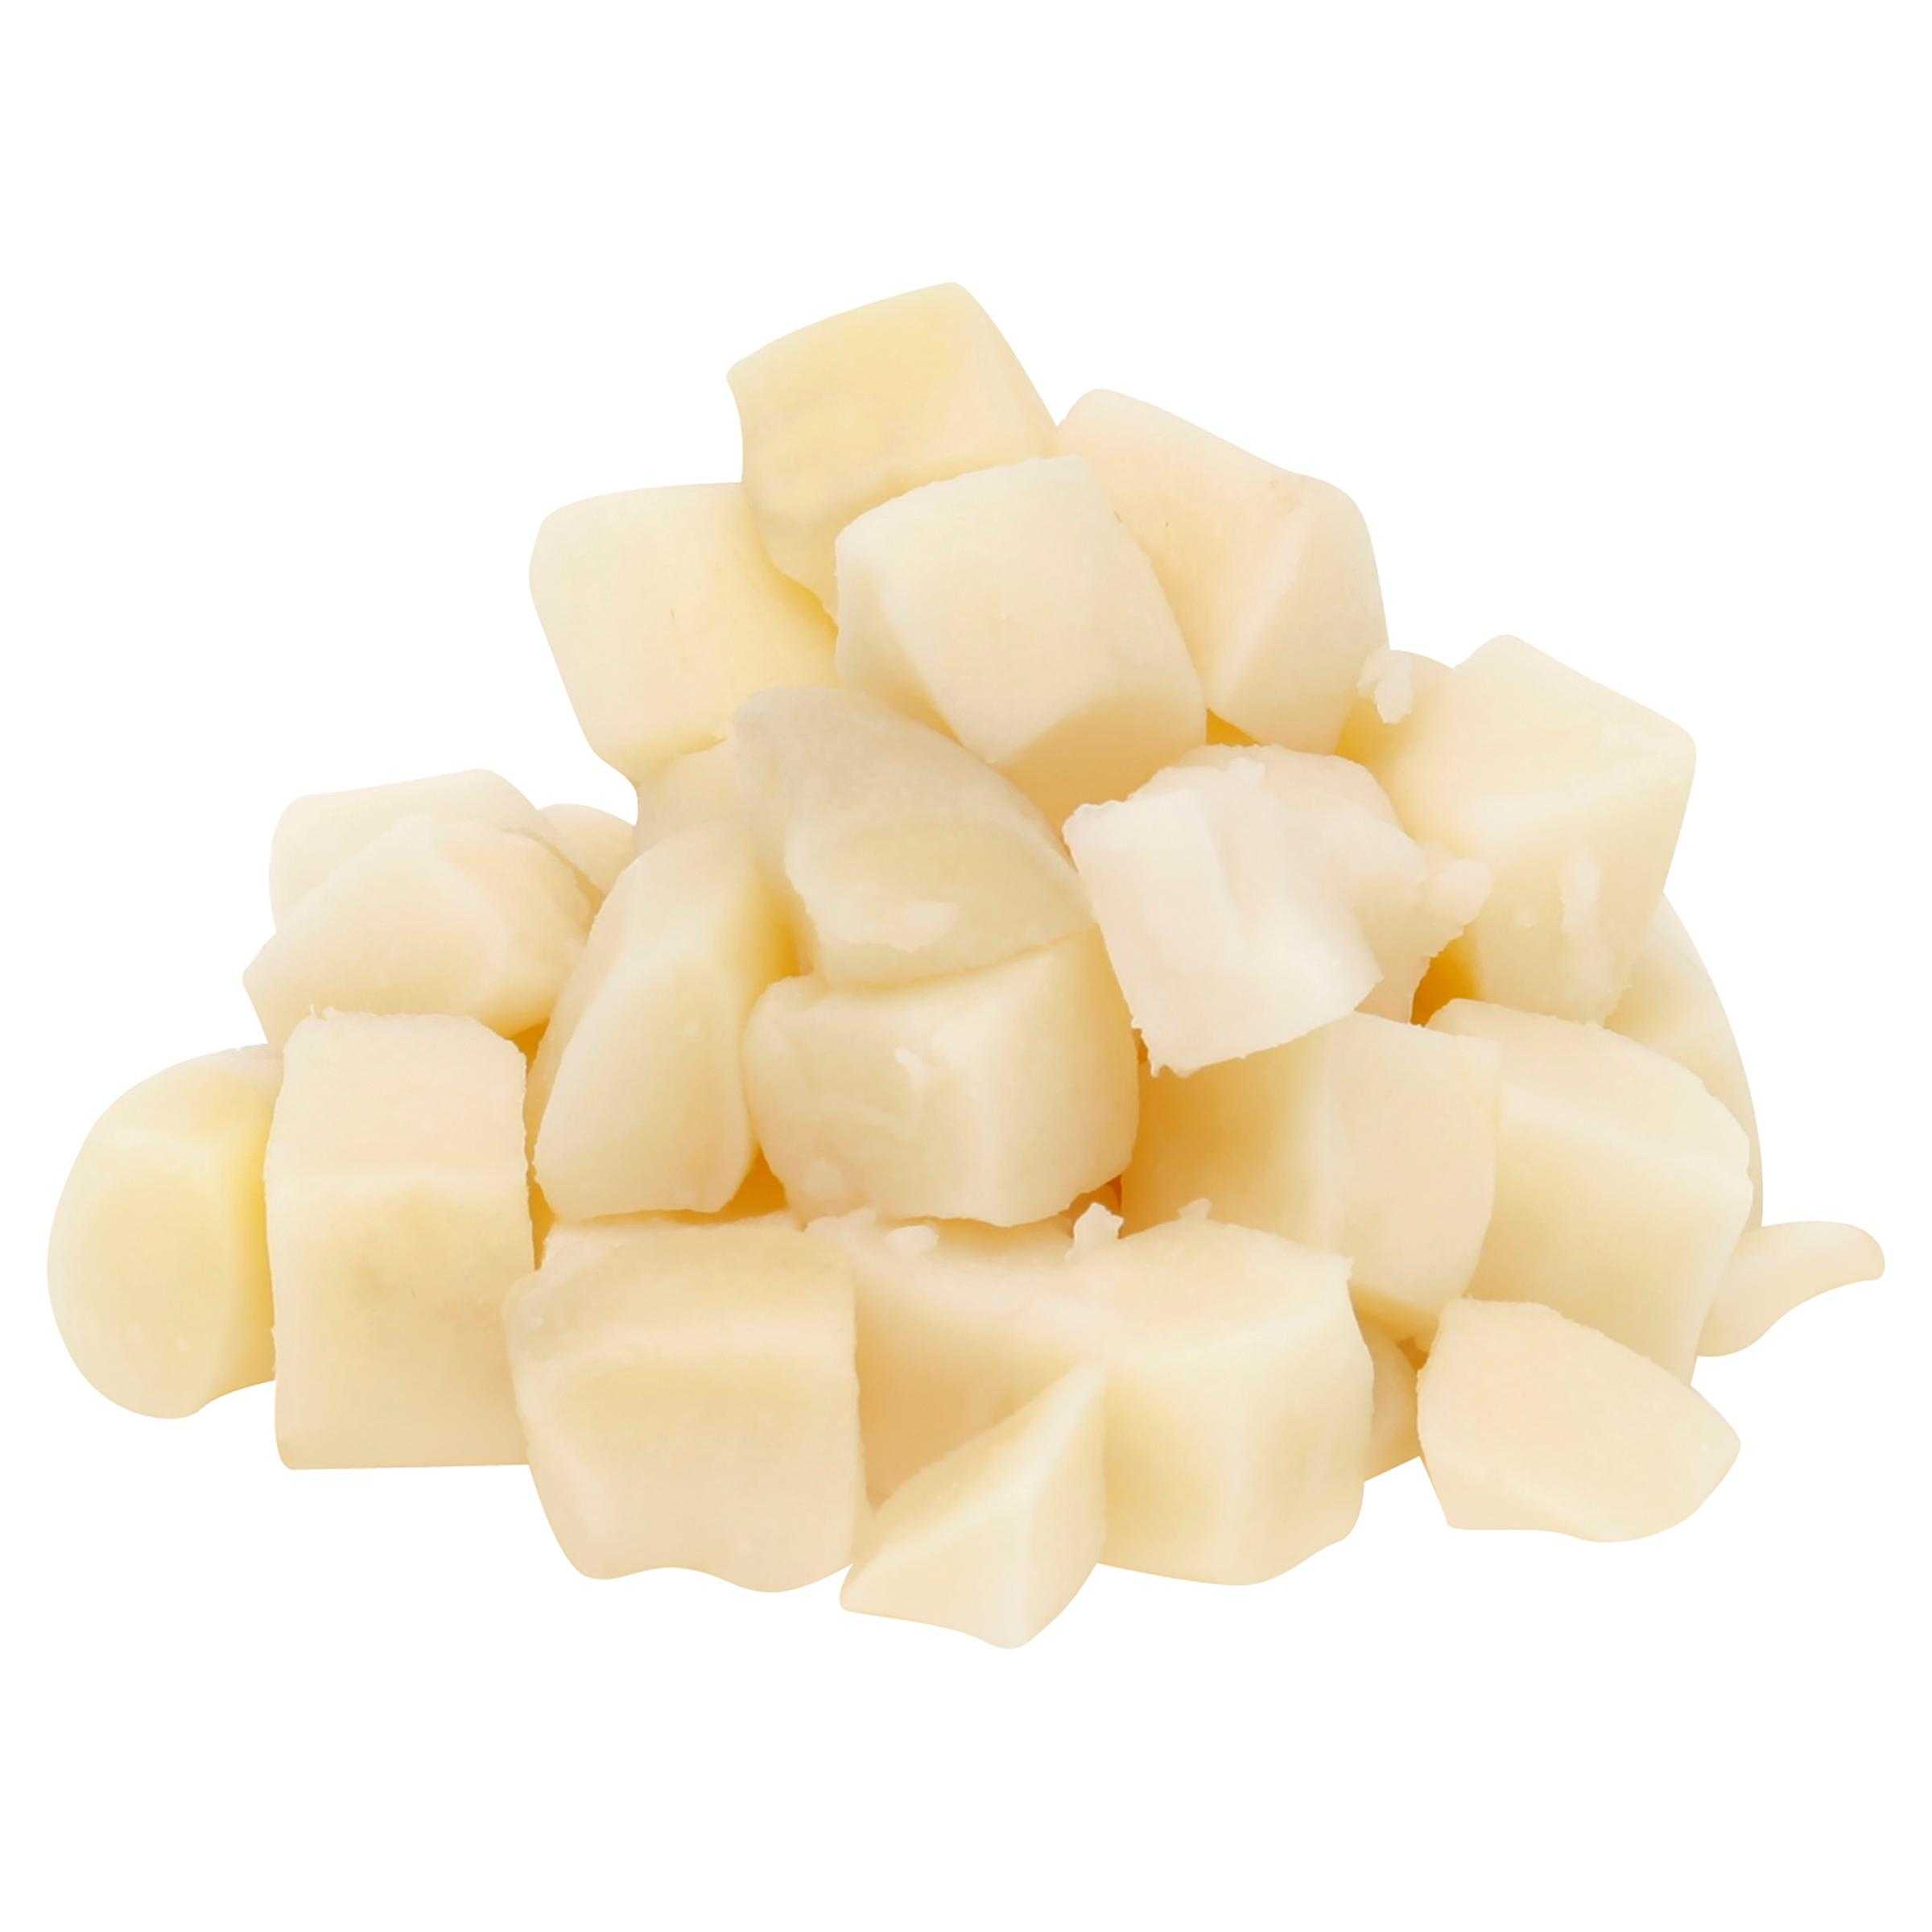 Simply Potatoes® Refrigerated 5/8″ Southern Style Diced Potatoes made with peeled Russet potatoes diced 5/8″ x 5/8″ x 3/4″, 2/10 Lb